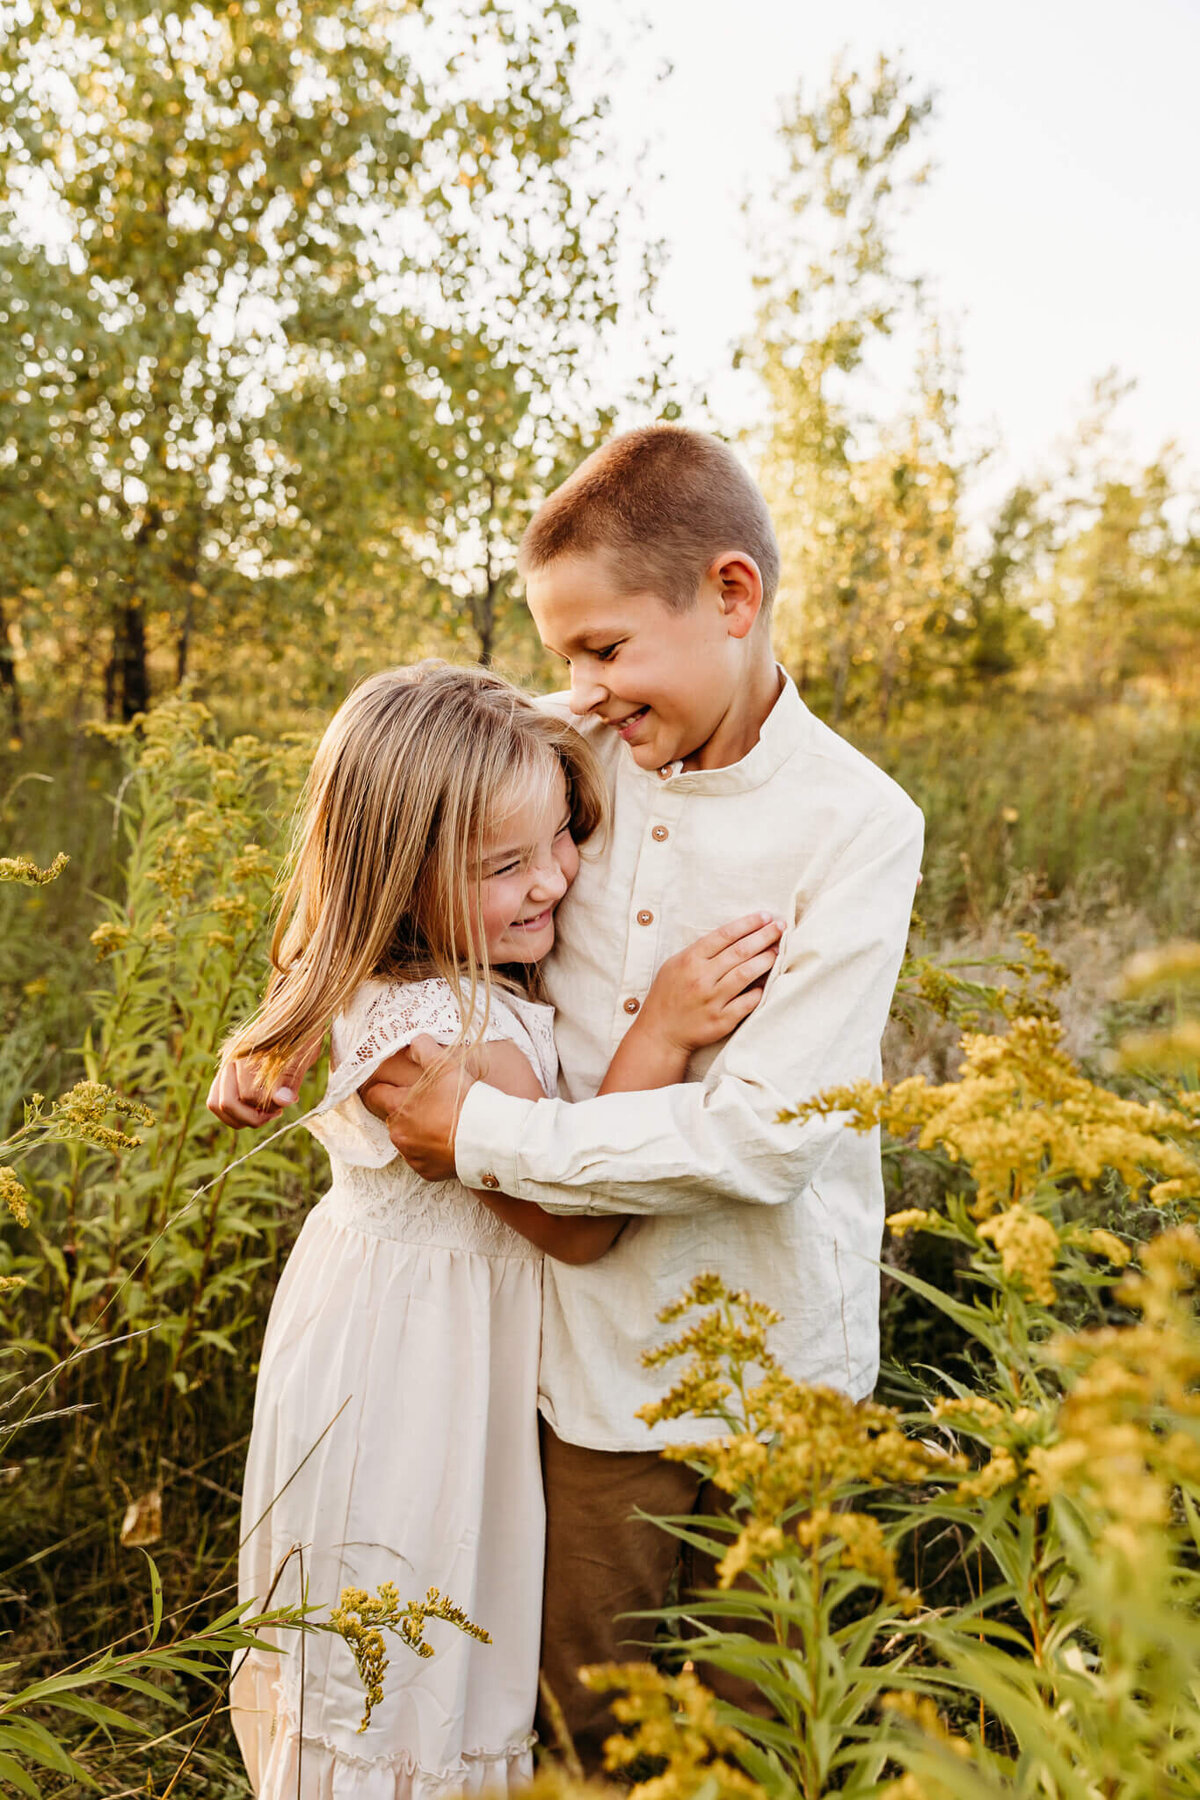 Brother and sister tickling each other in a field of goldenrod by Ashley Kalbus Photography.